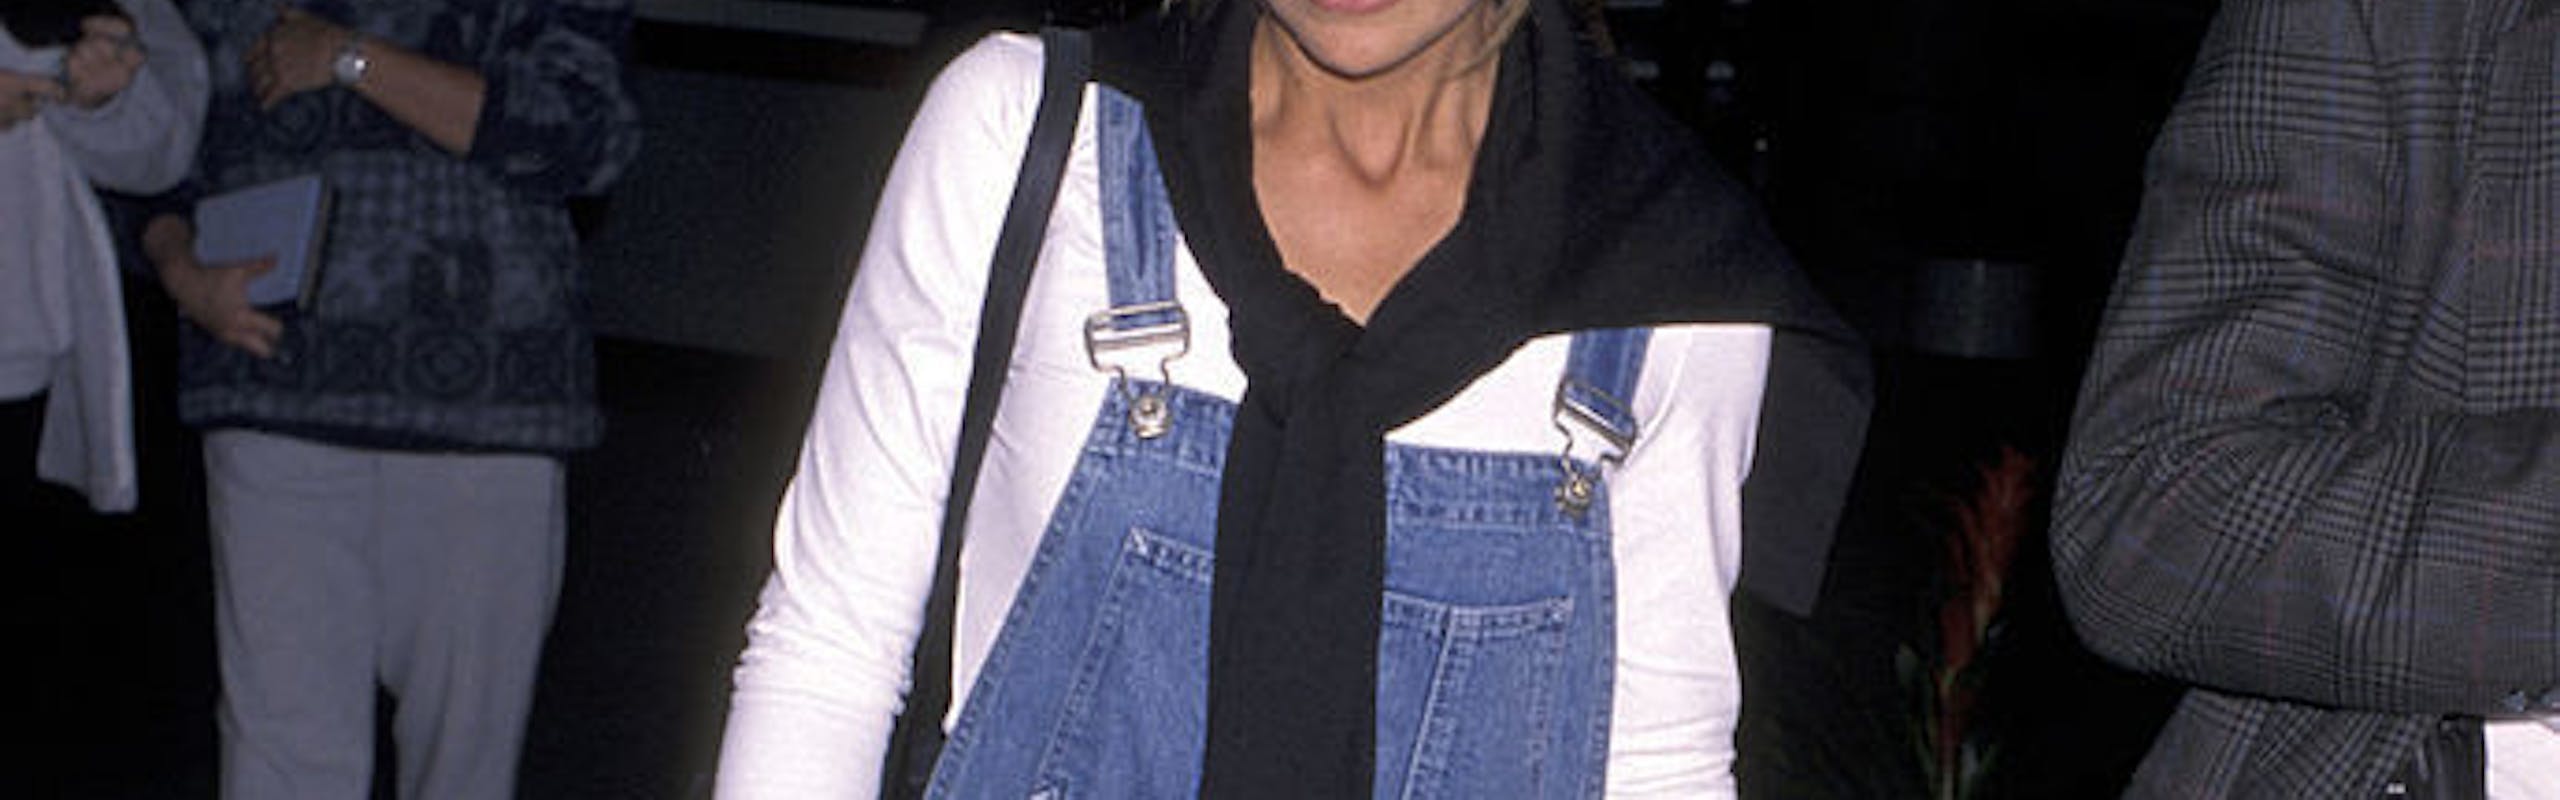 Sarah Michelle Gellar in blue overalls, a white long sleeve under shirt, and black sunglasses